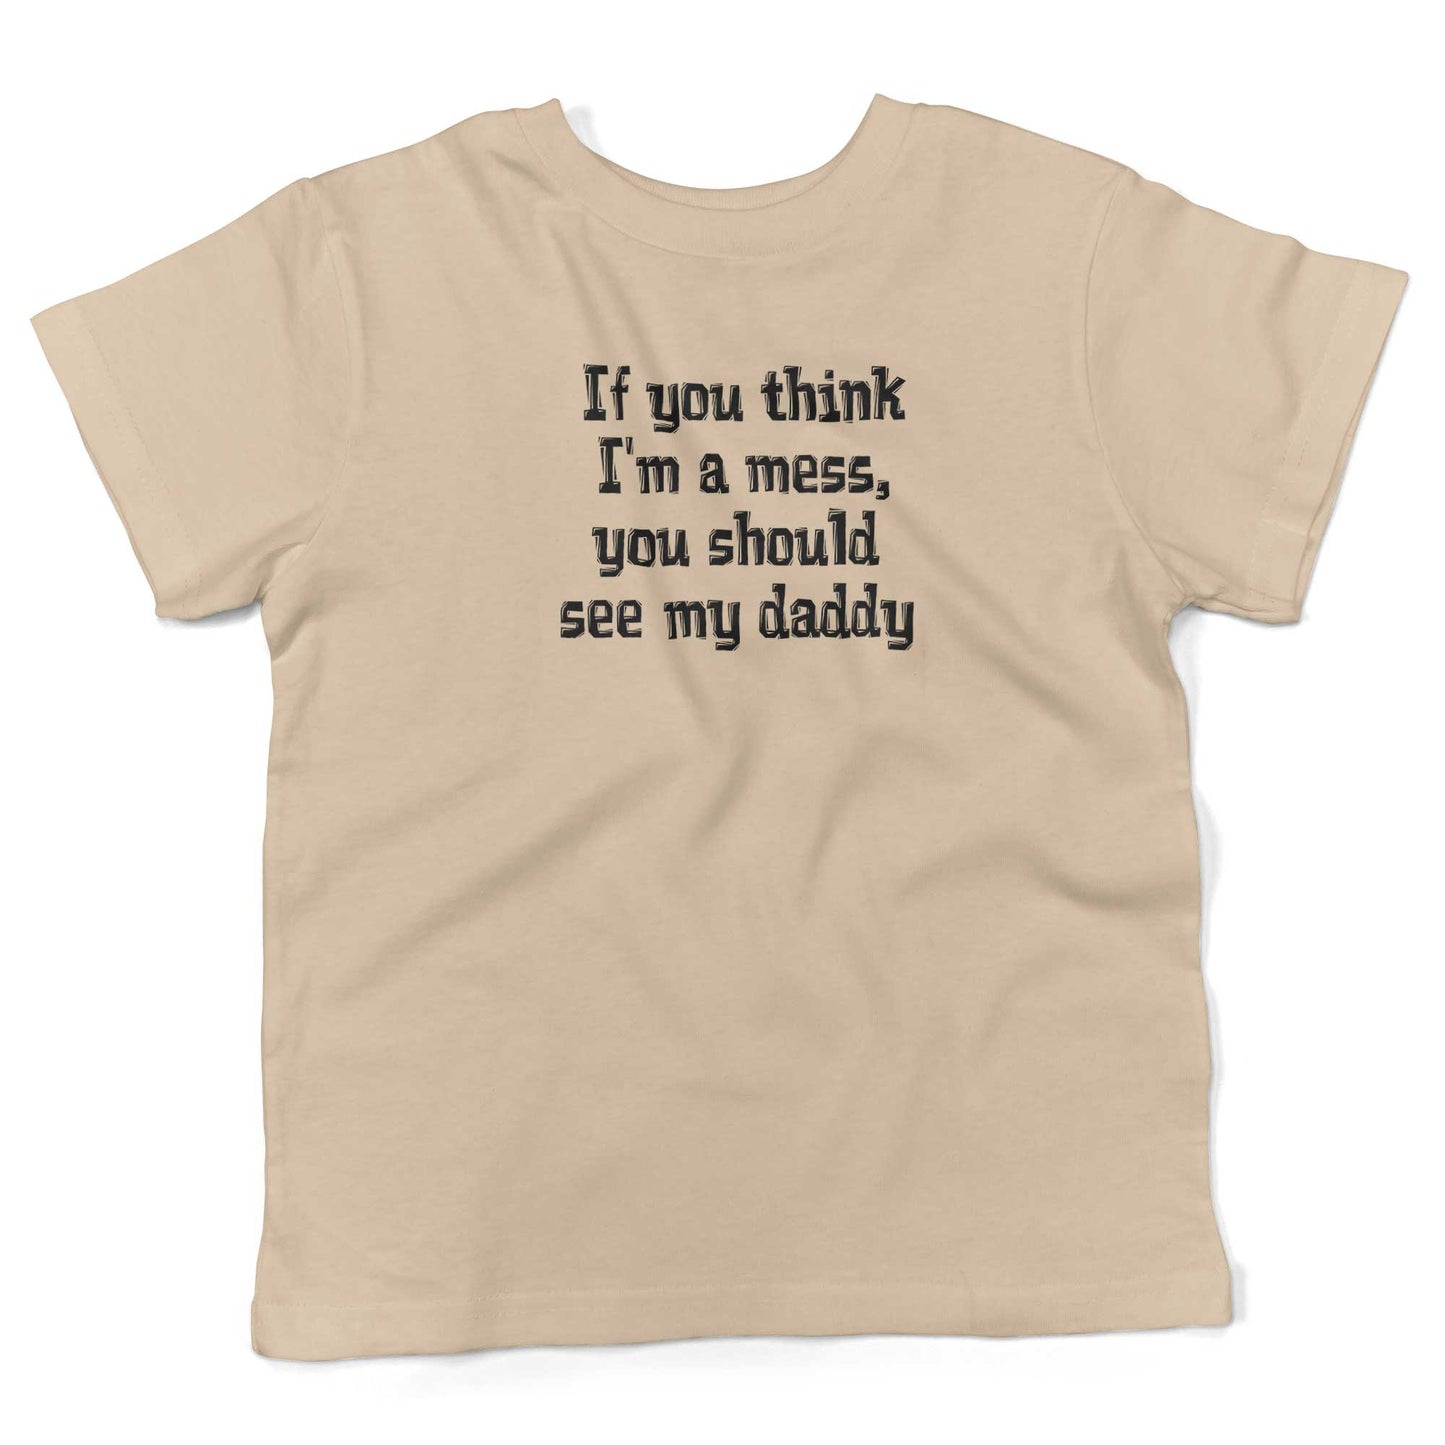 If You Think I'm A Mess, You Should See My Daddy Toddler Shirt-Organic Natural-2T